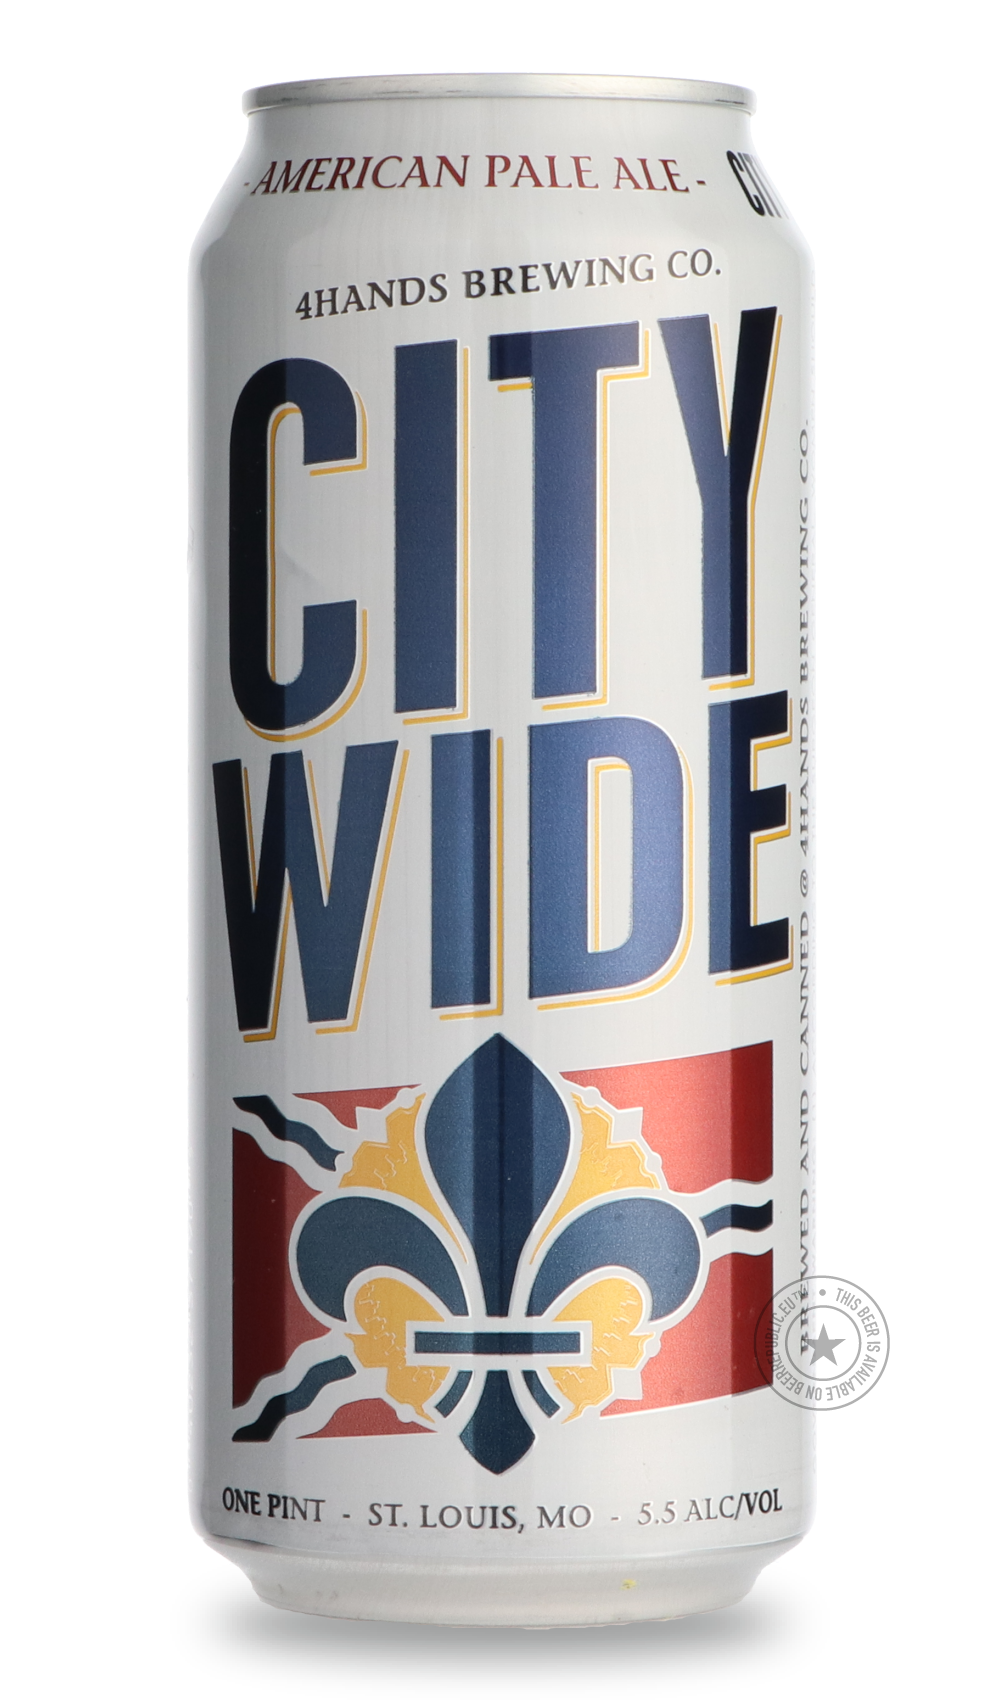 -4 Hands- City Wide-Pale- Only @ Beer Republic - The best online beer store for American & Canadian craft beer - Buy beer online from the USA and Canada - Bier online kopen - Amerikaans bier kopen - Craft beer store - Craft beer kopen - Amerikanisch bier kaufen - Bier online kaufen - Acheter biere online - IPA - Stout - Porter - New England IPA - Hazy IPA - Imperial Stout - Barrel Aged - Barrel Aged Imperial Stout - Brown - Dark beer - Blond - Blonde - Pilsner - Lager - Wheat - Weizen - Amber - Barley Wine 